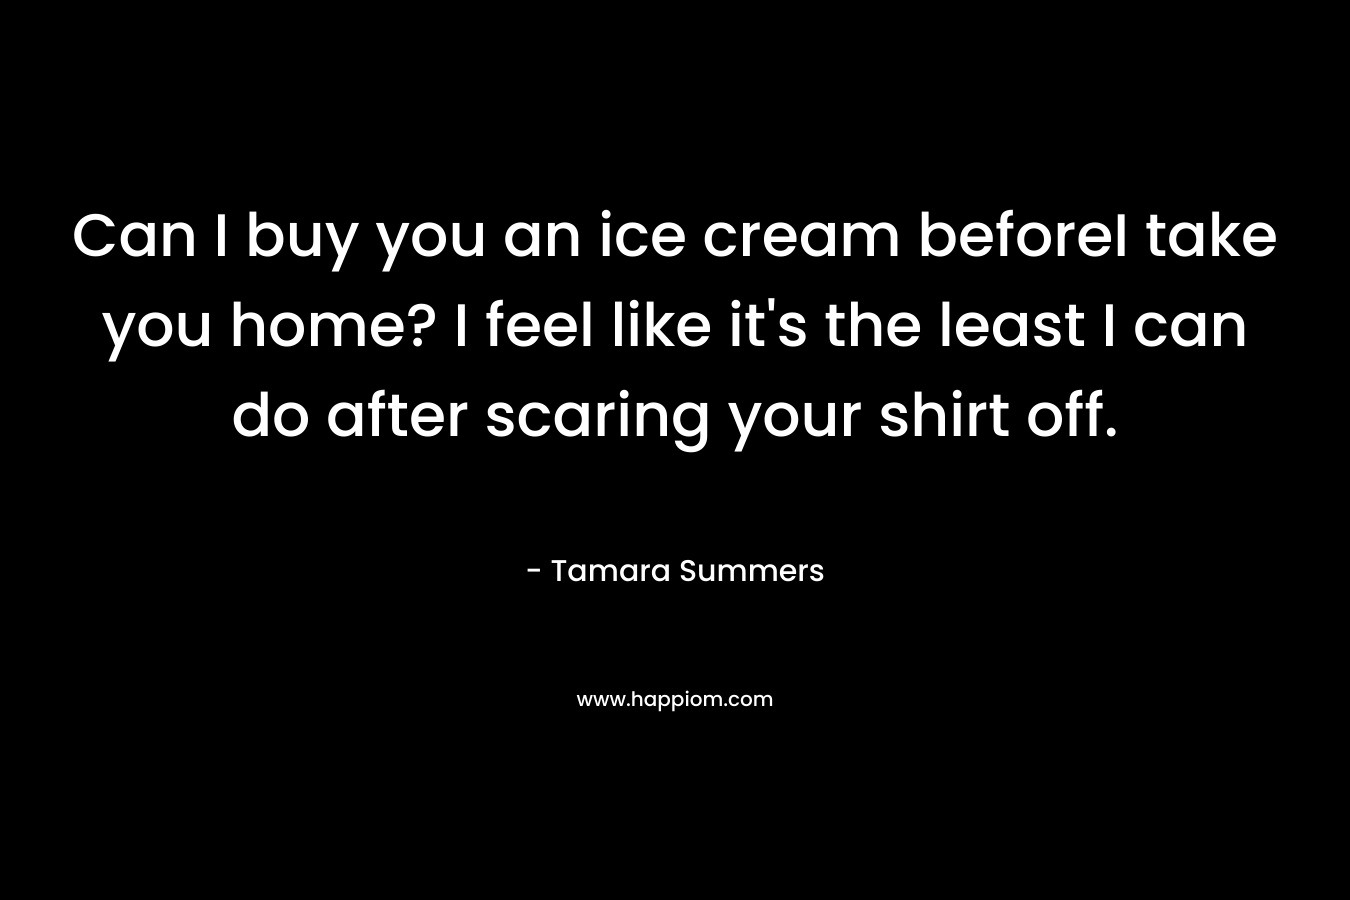 Can I buy you an ice cream beforeI take you home? I feel like it's the least I can do after scaring your shirt off.